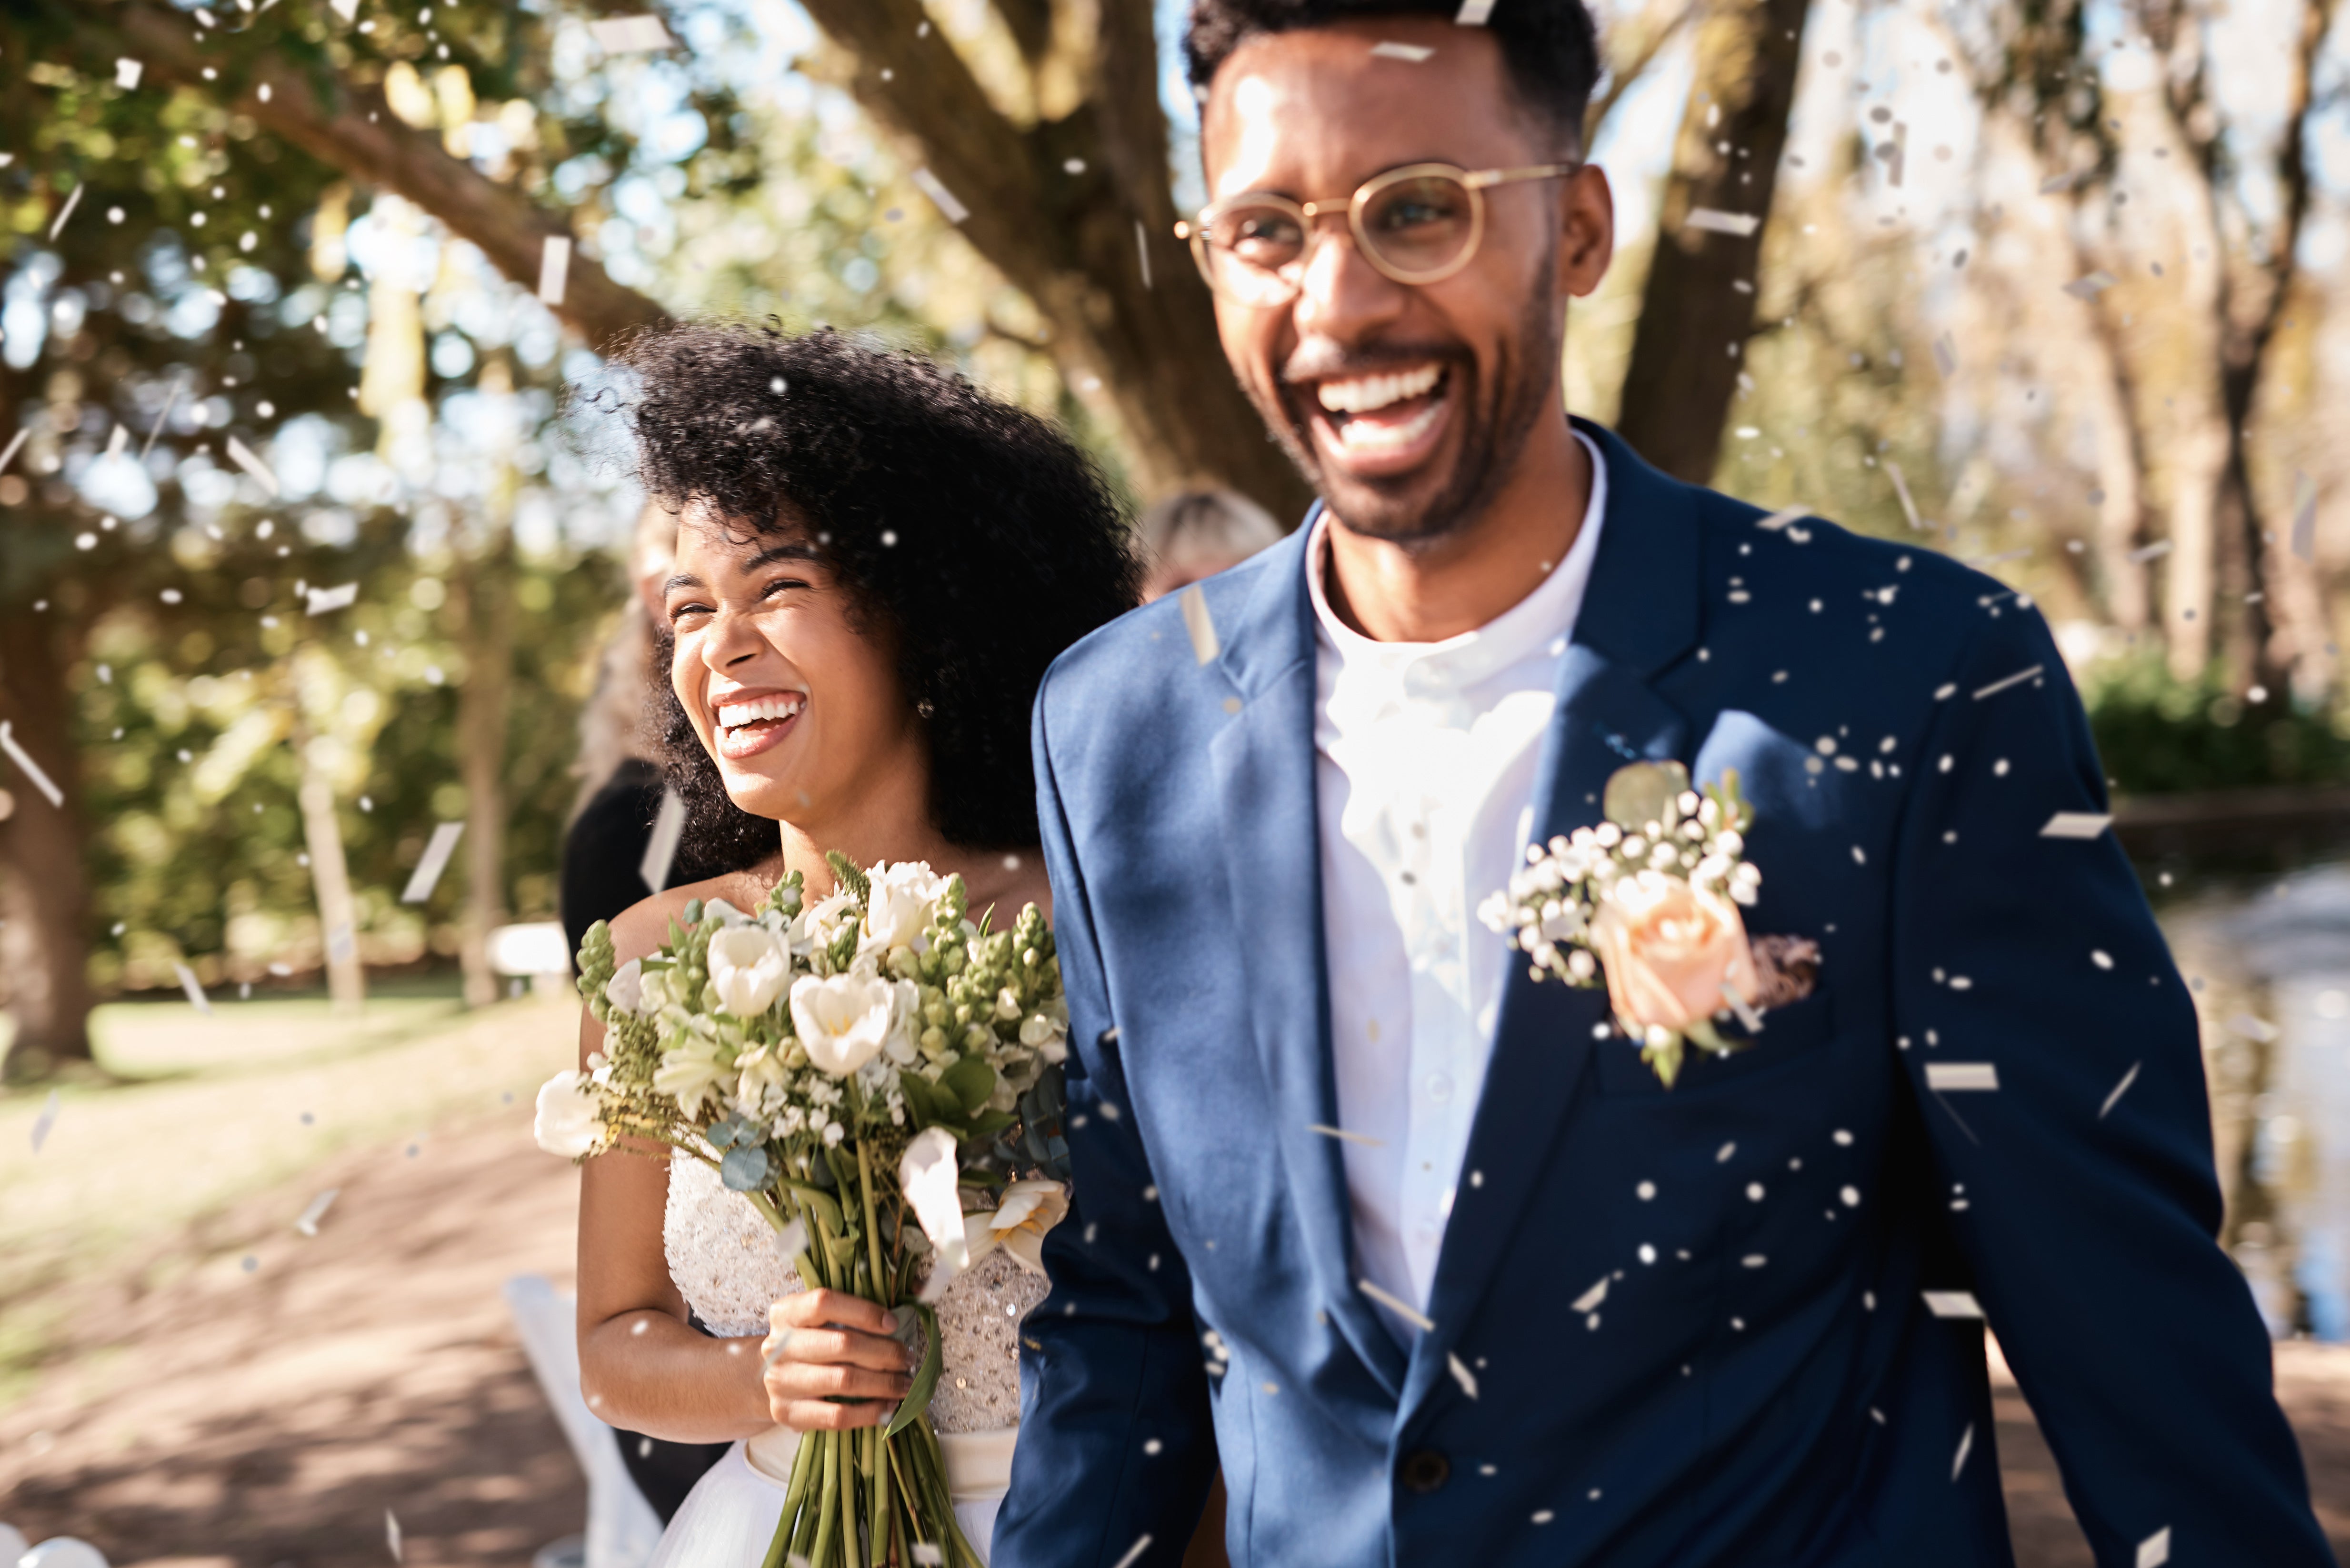 Outdoor weddings are here to stay